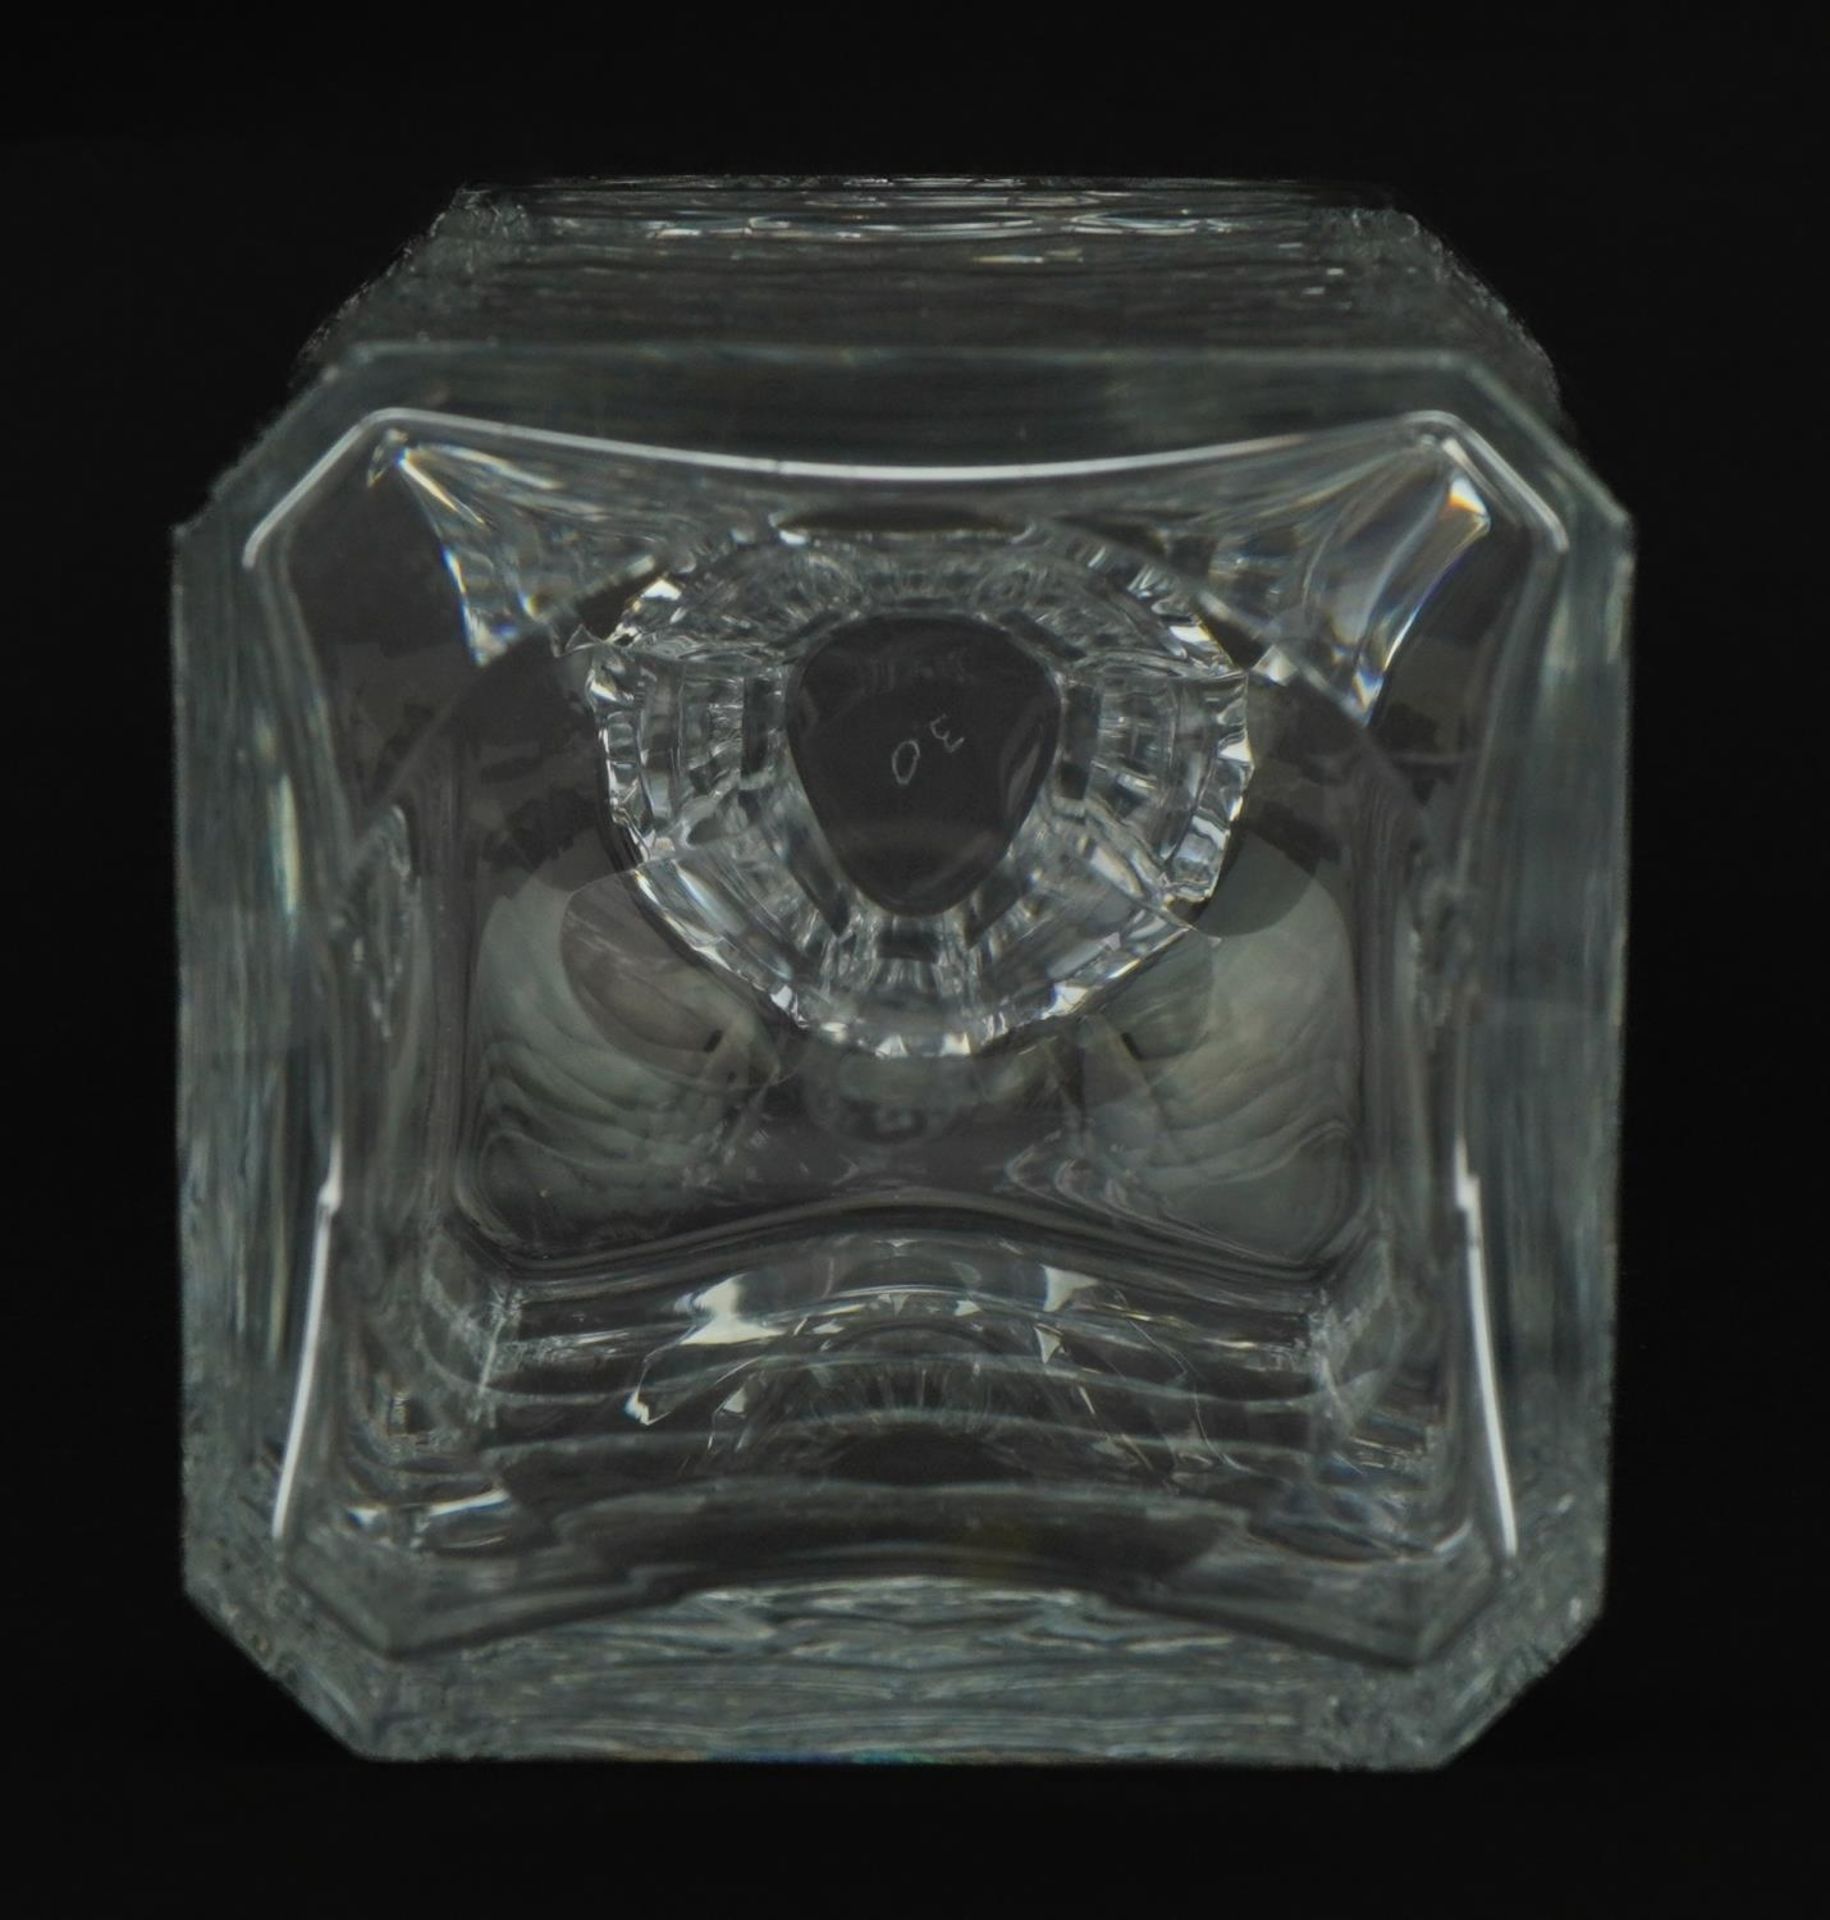 Baccarat, French crystal decanter, 24.5cm high - Image 6 of 8